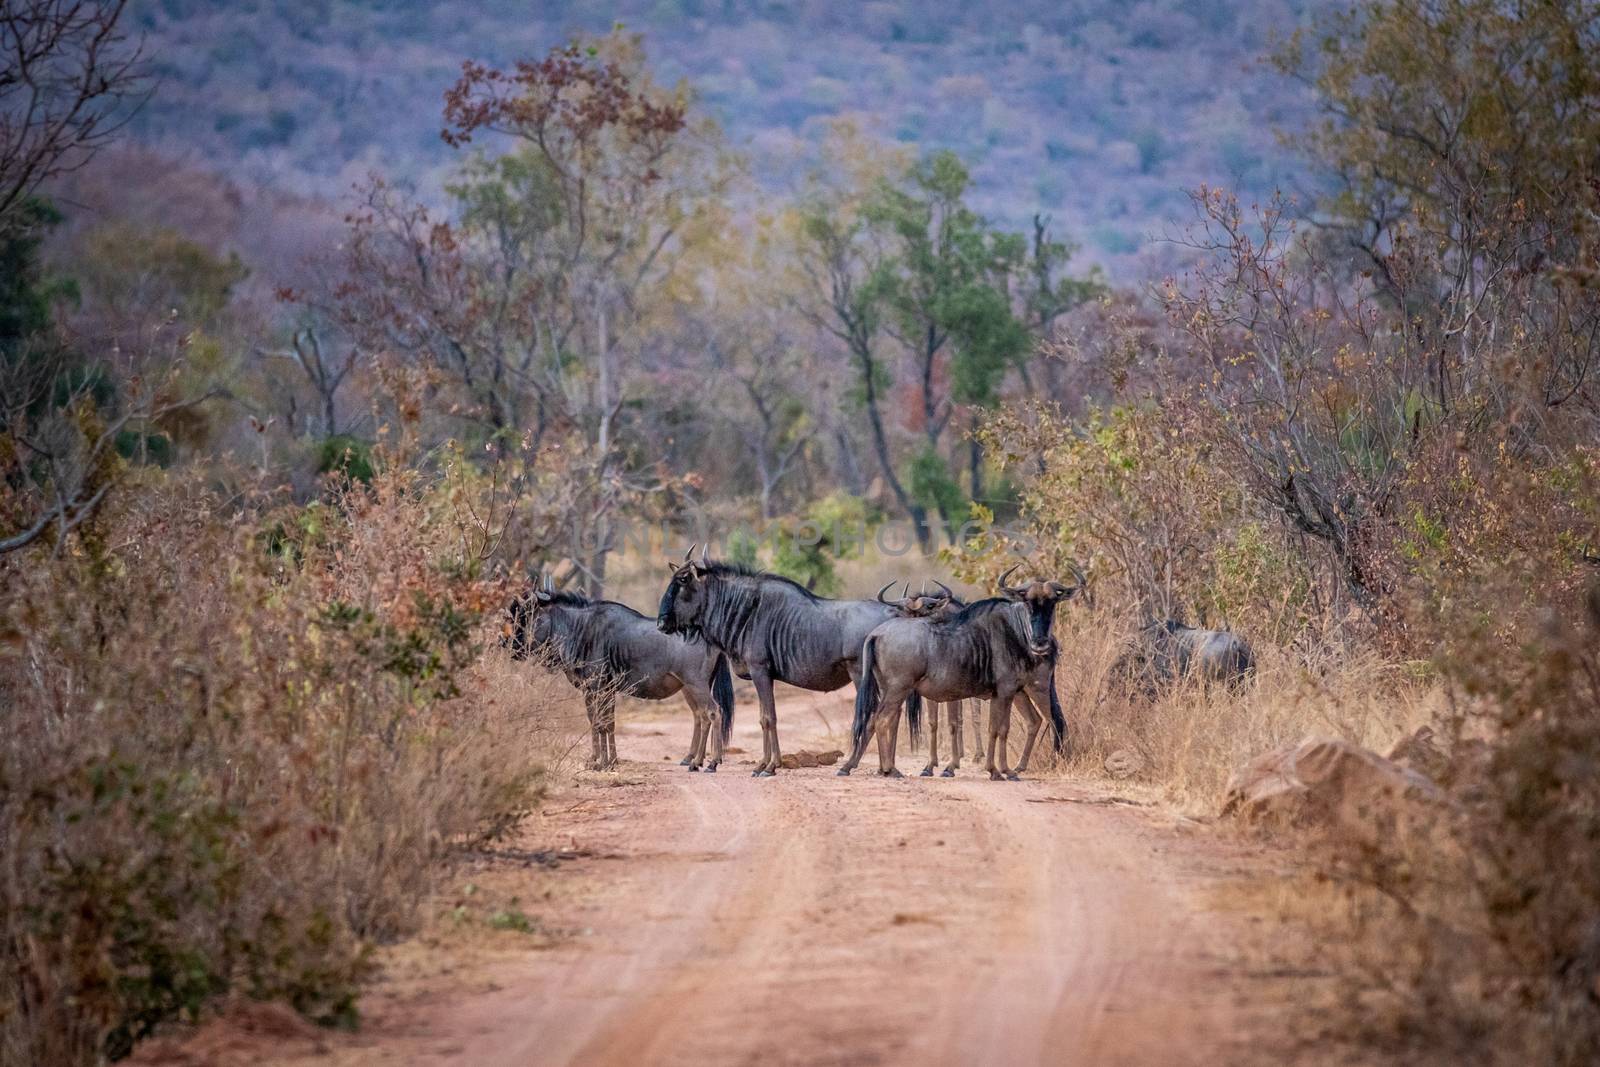 Blue wildebeest standing in the road. by Simoneemanphotography